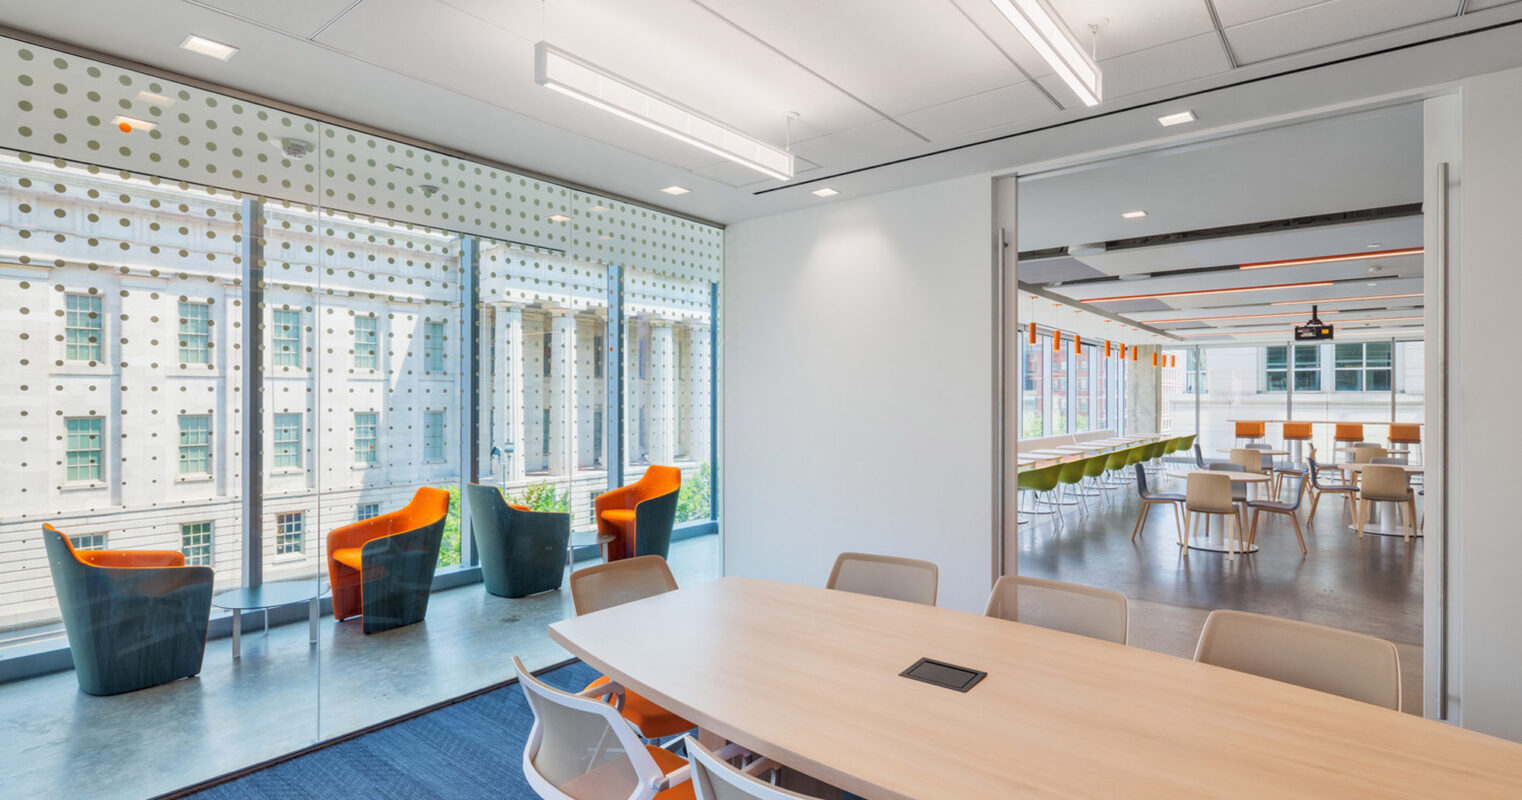 Modern open-concept office space with natural light filtering through patterned window screens. Sleek, light wood conference table paired with orange and white chairs, complemented by a casual dining area in the background with pendant lighting. Vibrant orange accents energize the room.